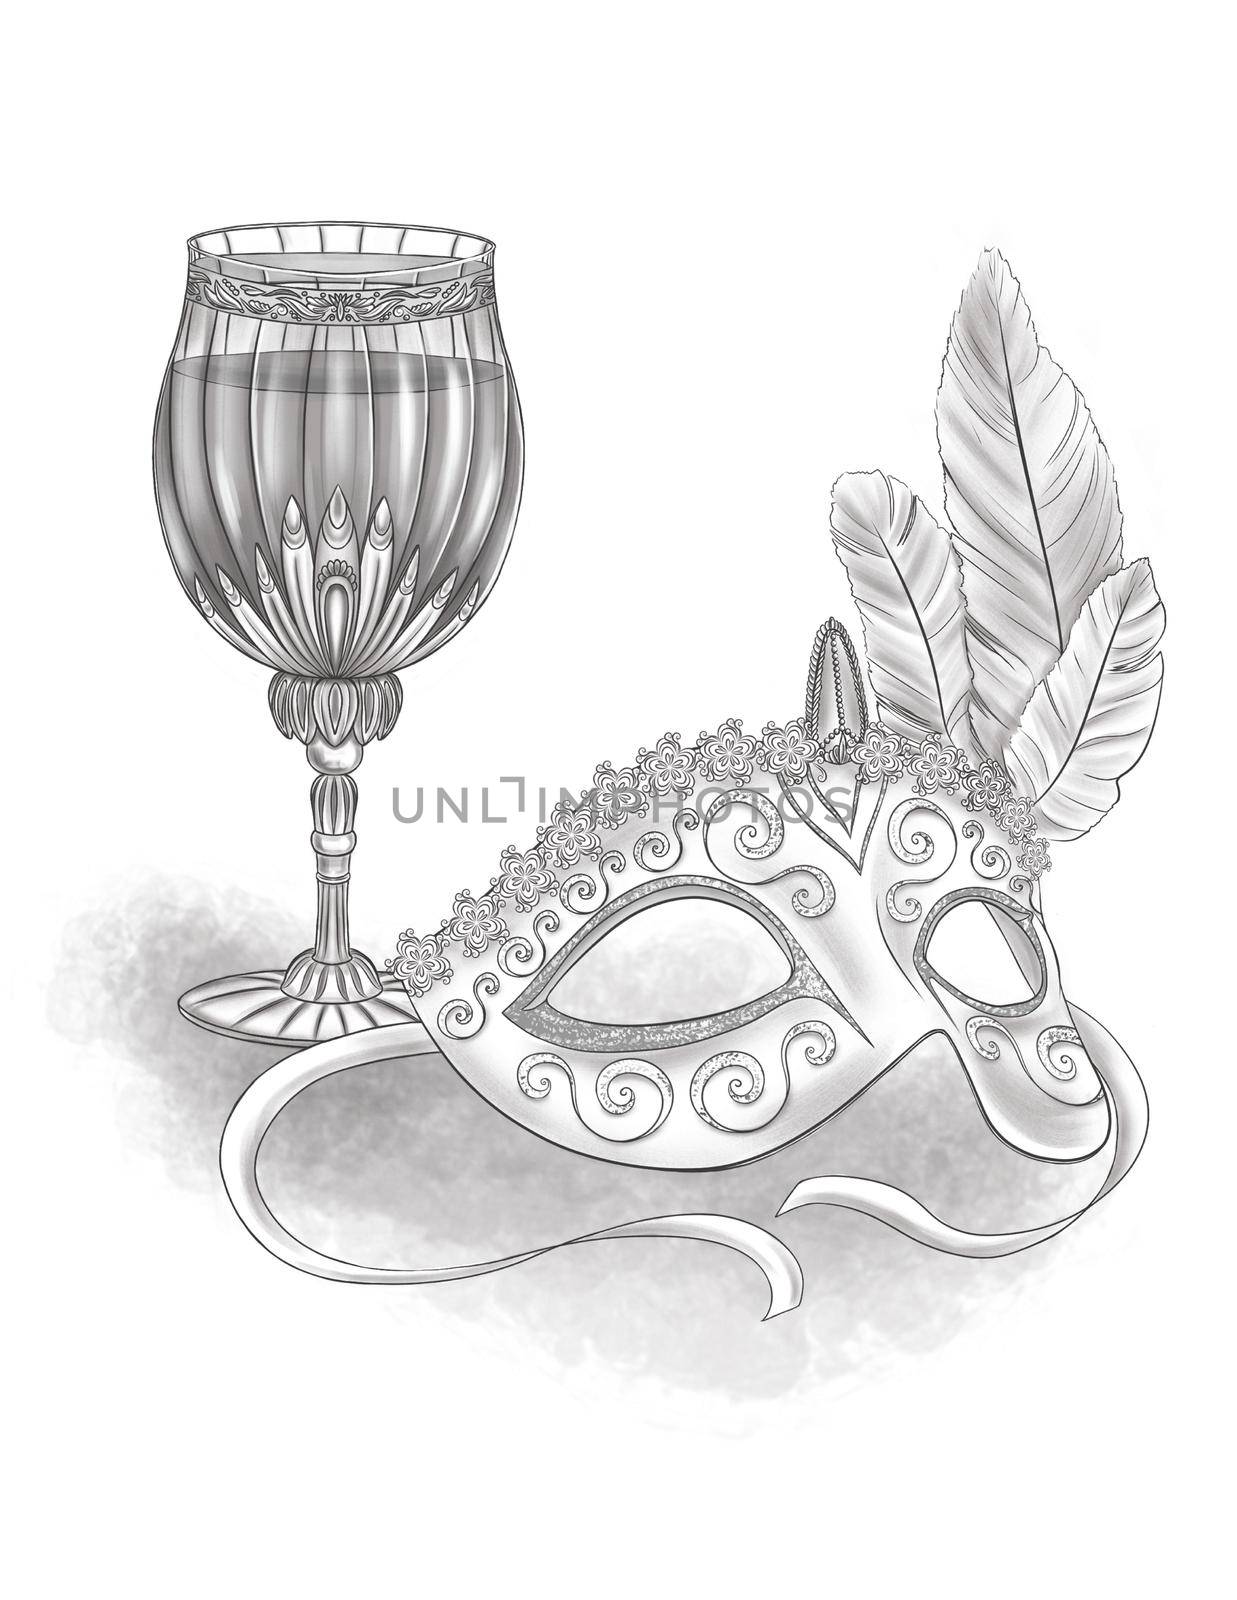 Masquerade Mask With Feathers Beside A Glass Full Of Wine Colorless Line Drawing. Carnival Party Eye Veil Cup Of Liquor Coloring Book Page. by nialowwa